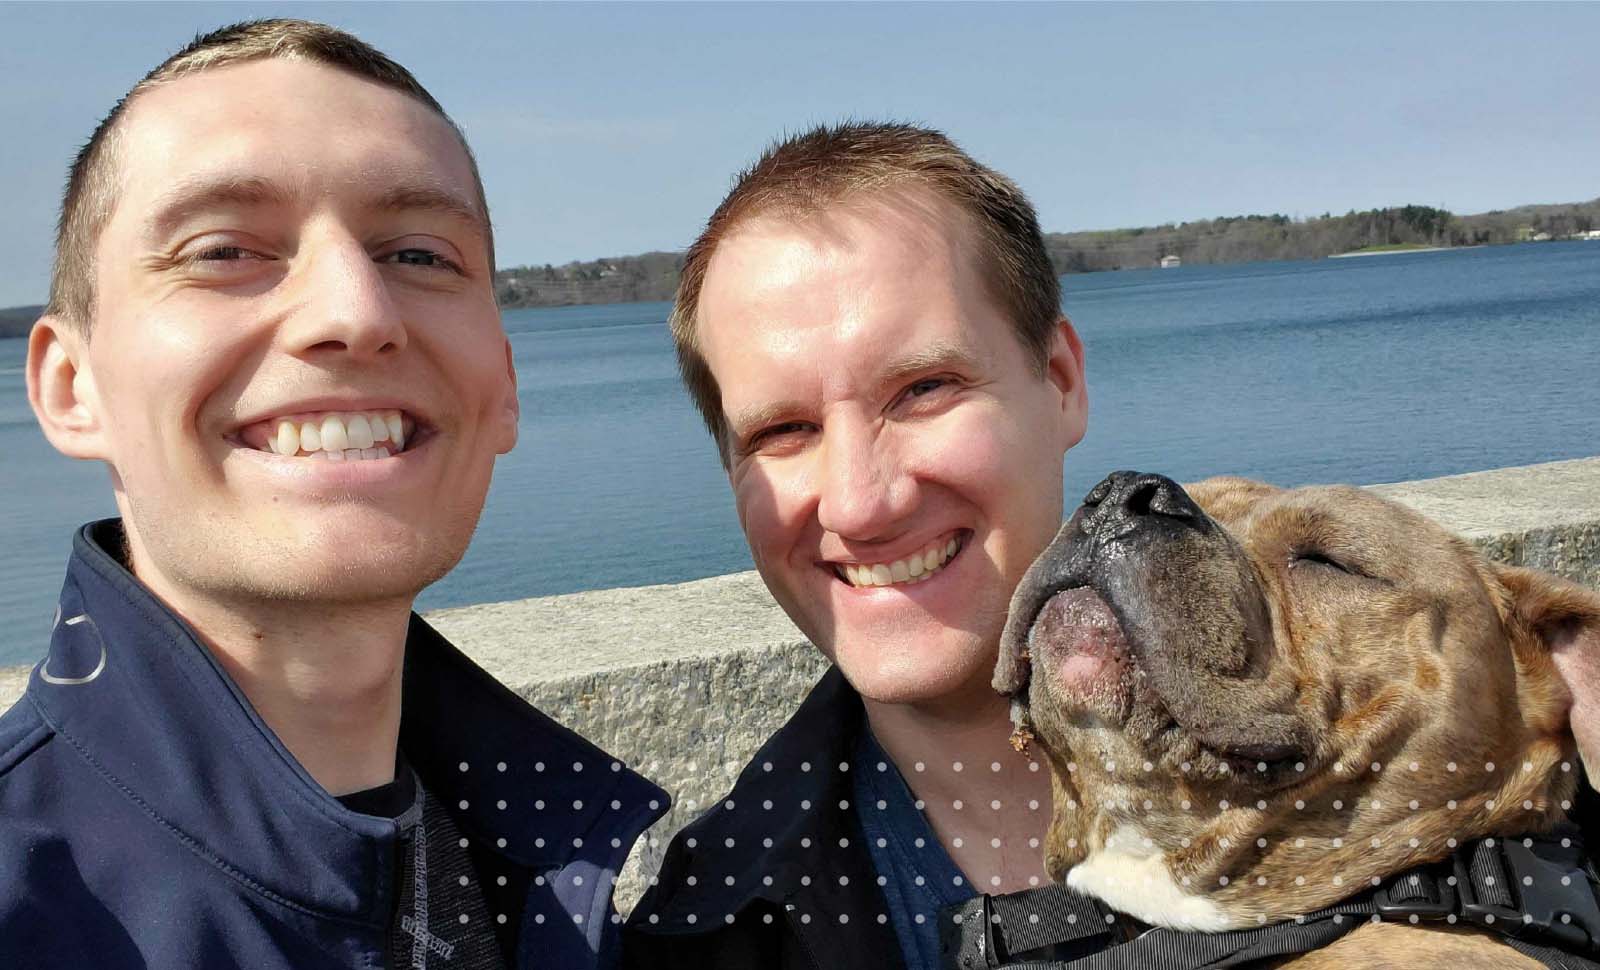 Author Joe Lisle, his husband, and their dog smile in nature